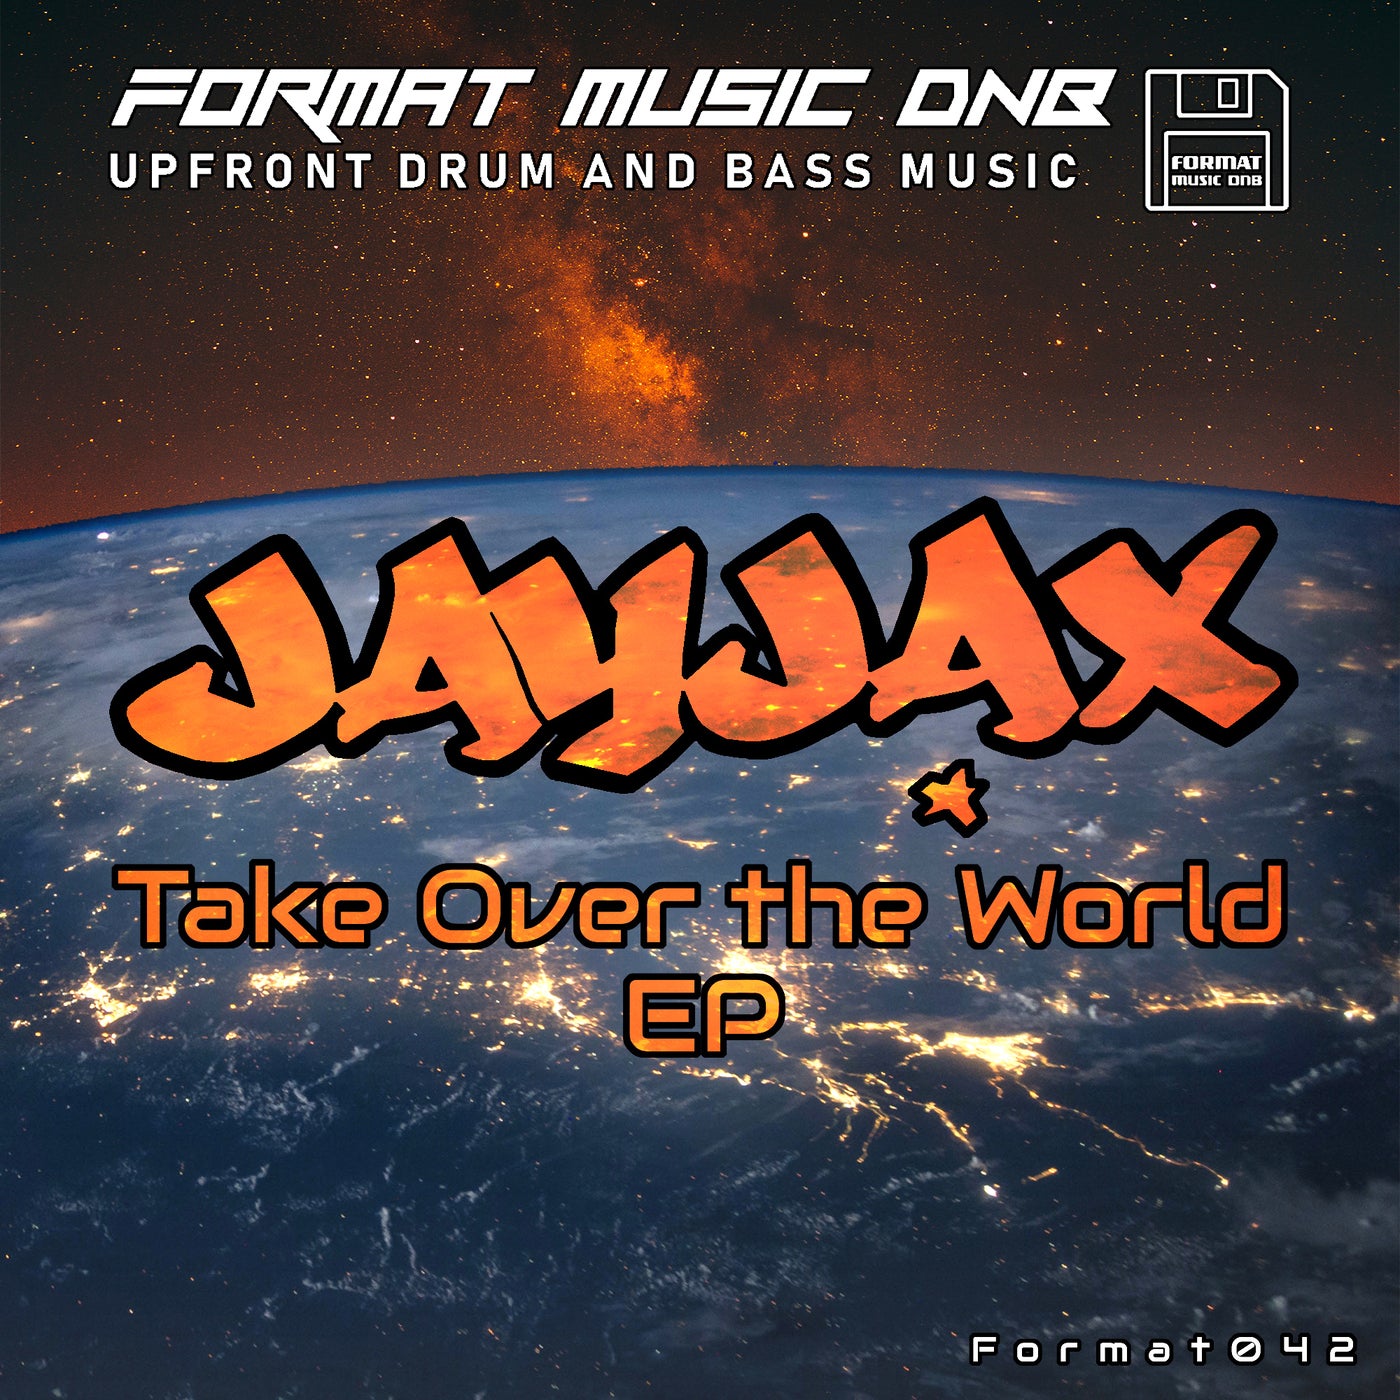 Take over the world EP